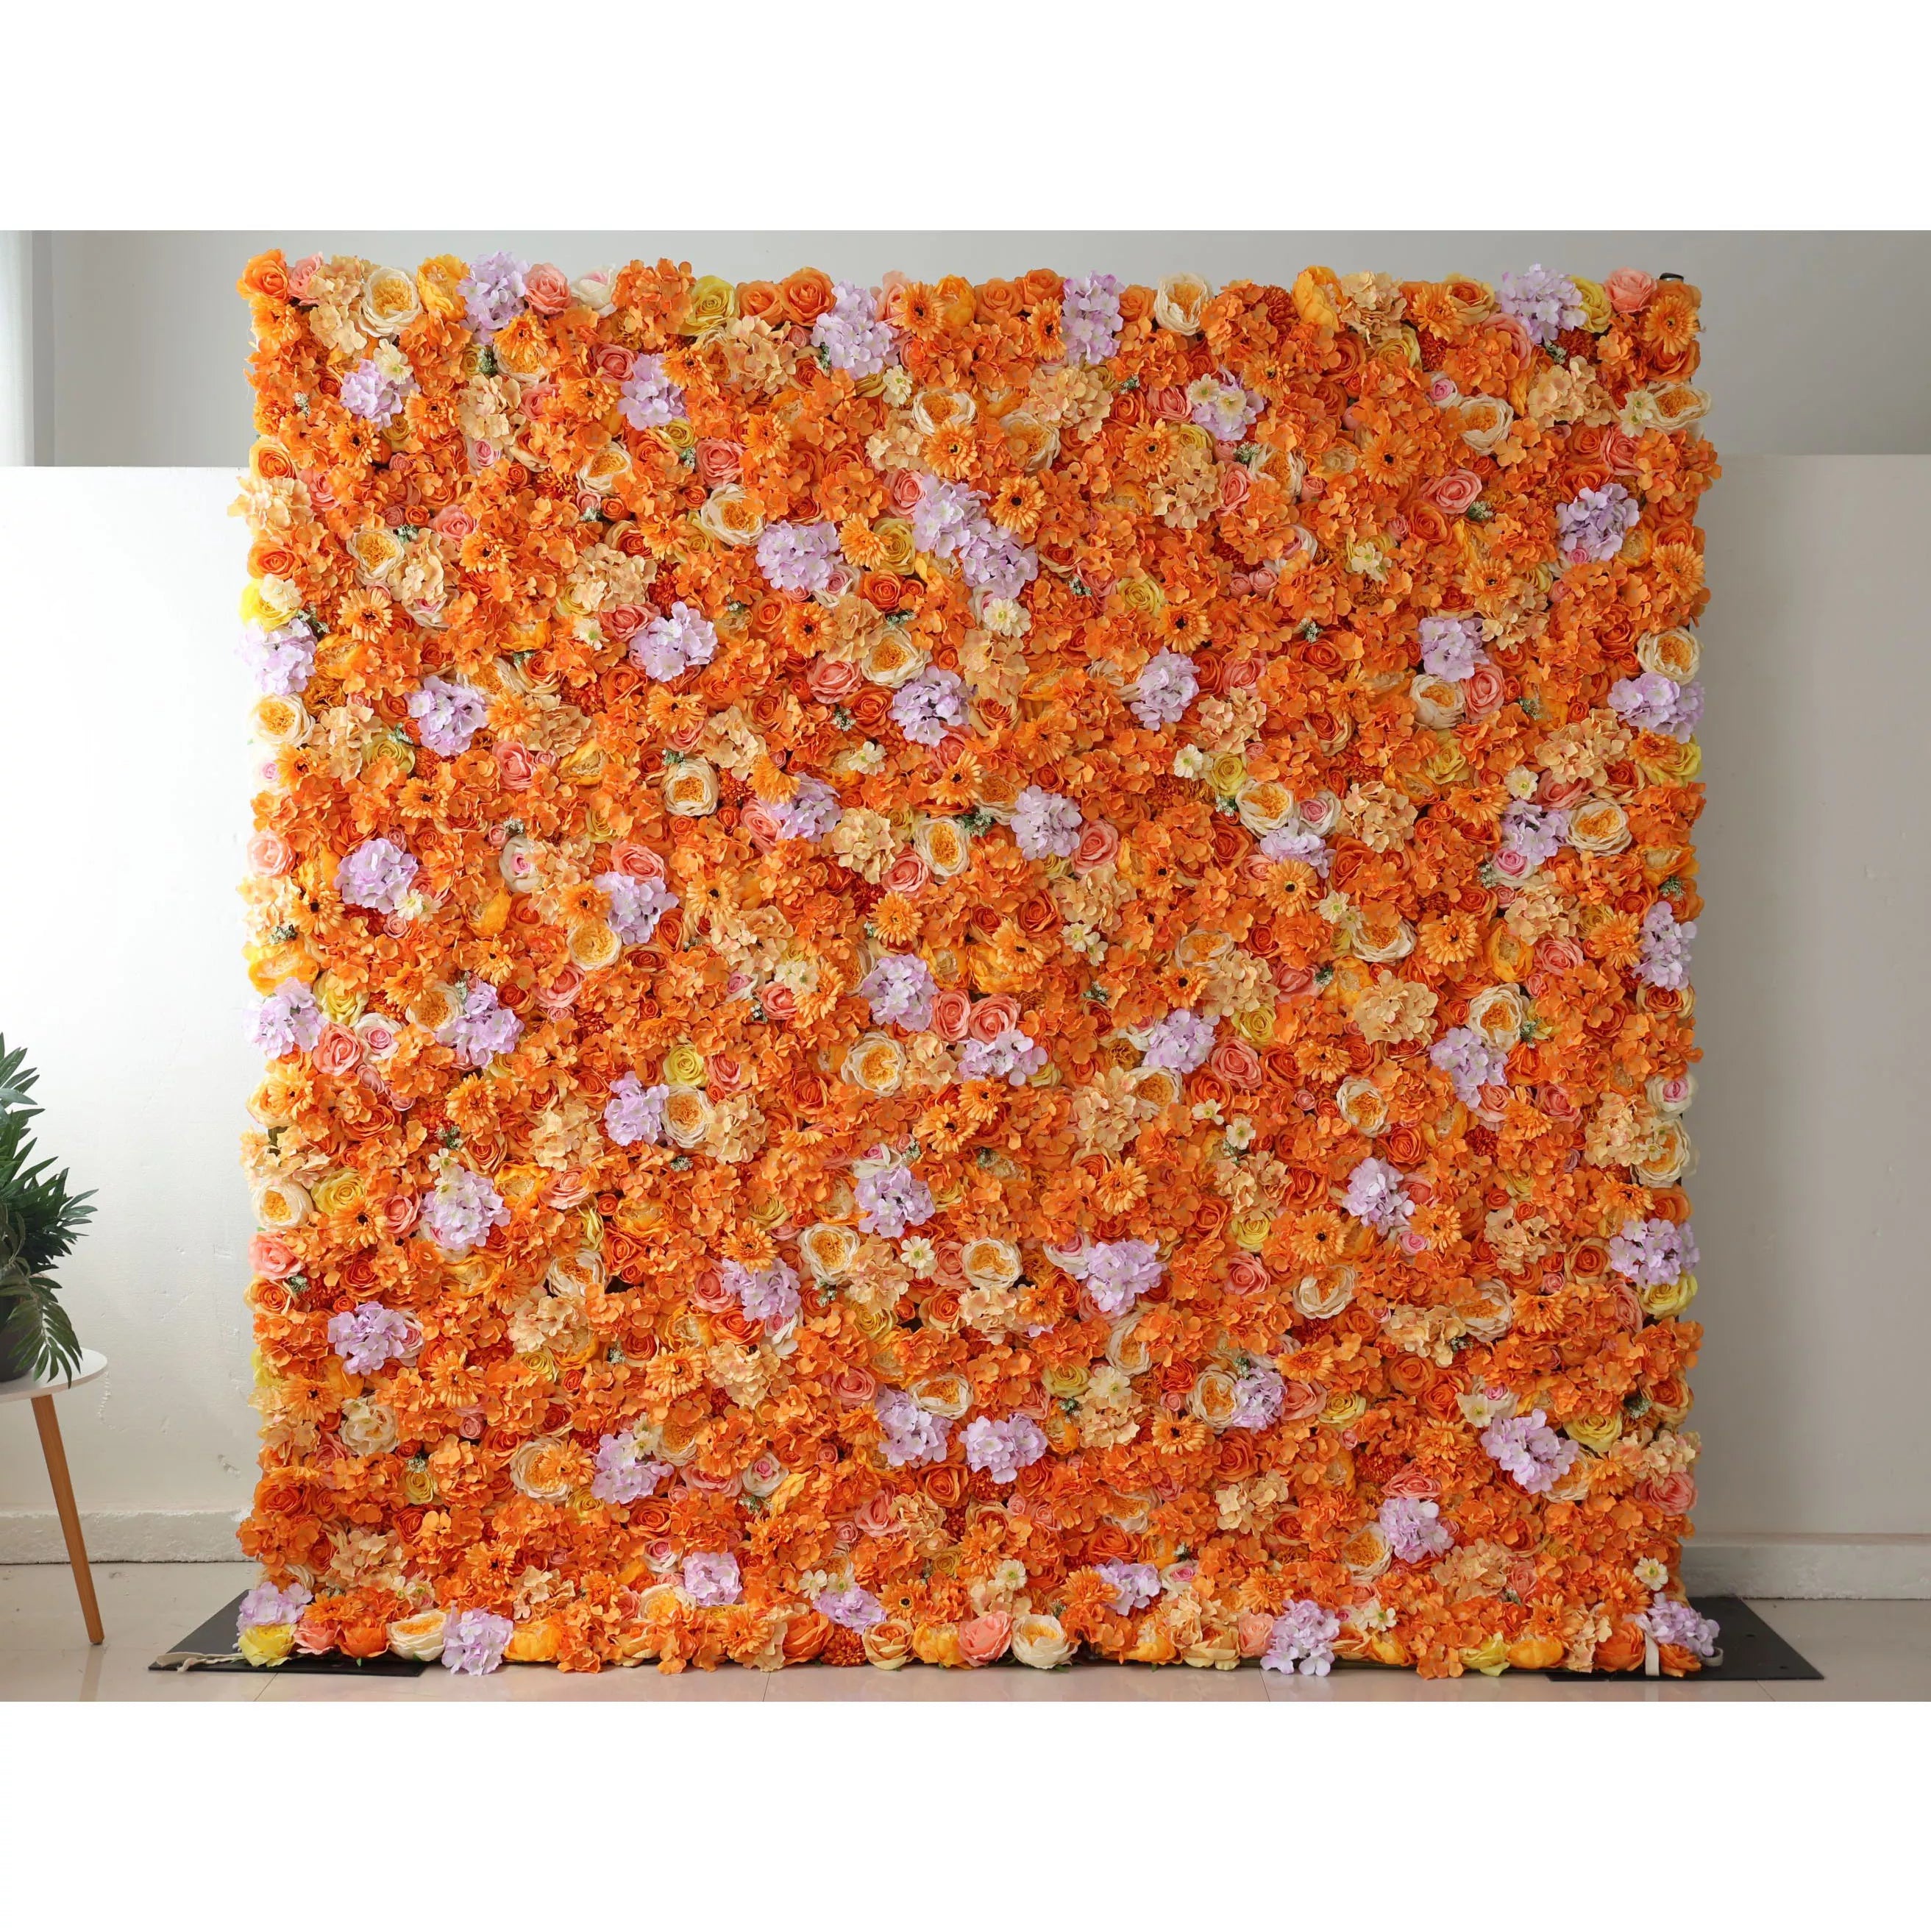 Valar Flowers Roll Up Fabric Artificial Papaya Orange and Yellow Flower Wall Wedding Backdrop, Floral Party Decor, Event Photography-VF-060